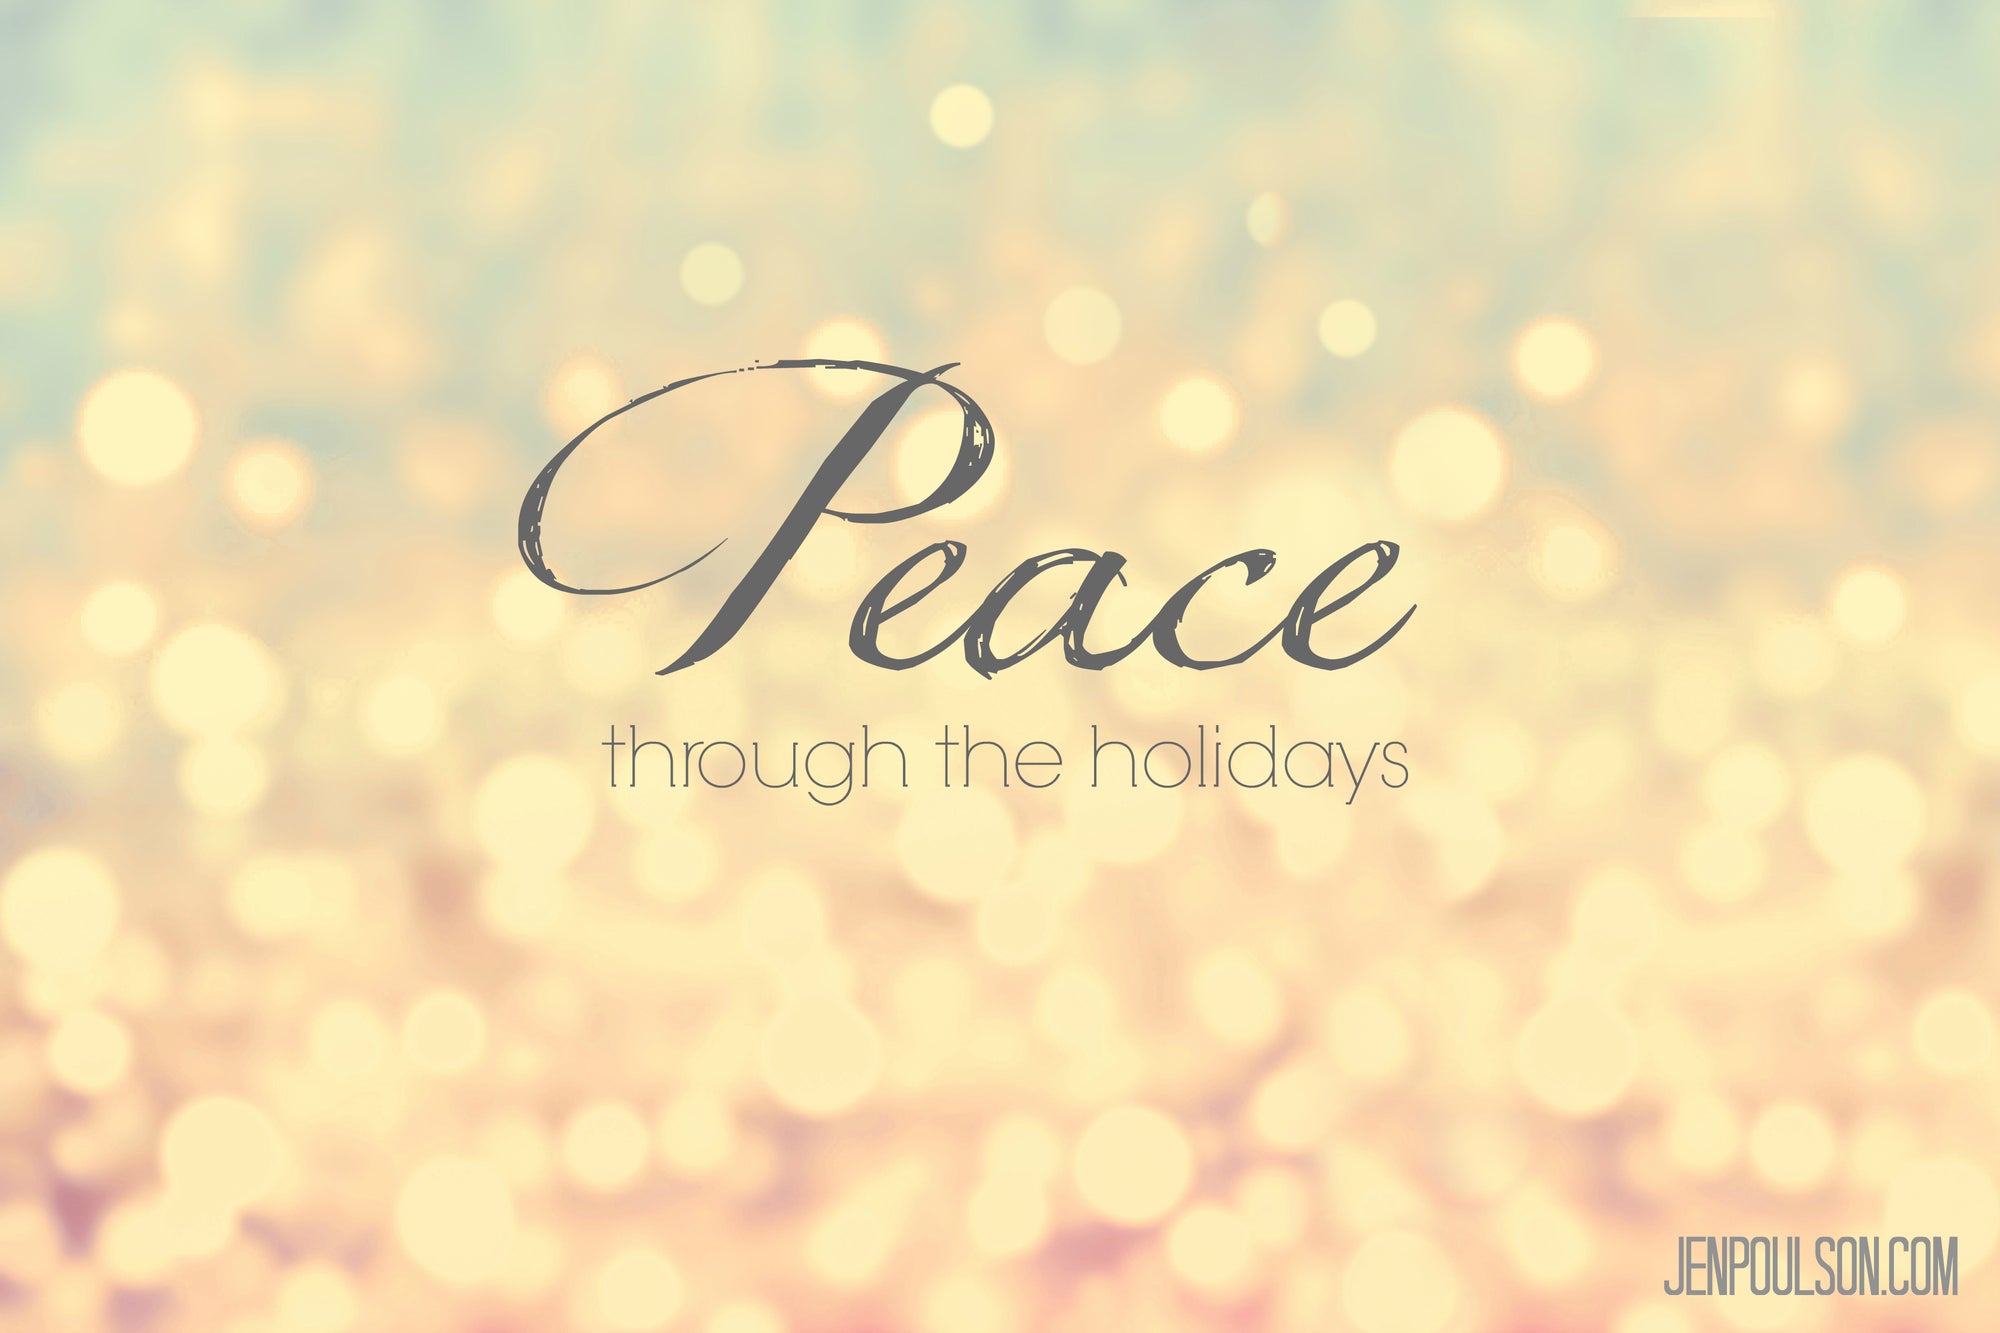 Being at Peace Through the Holidays